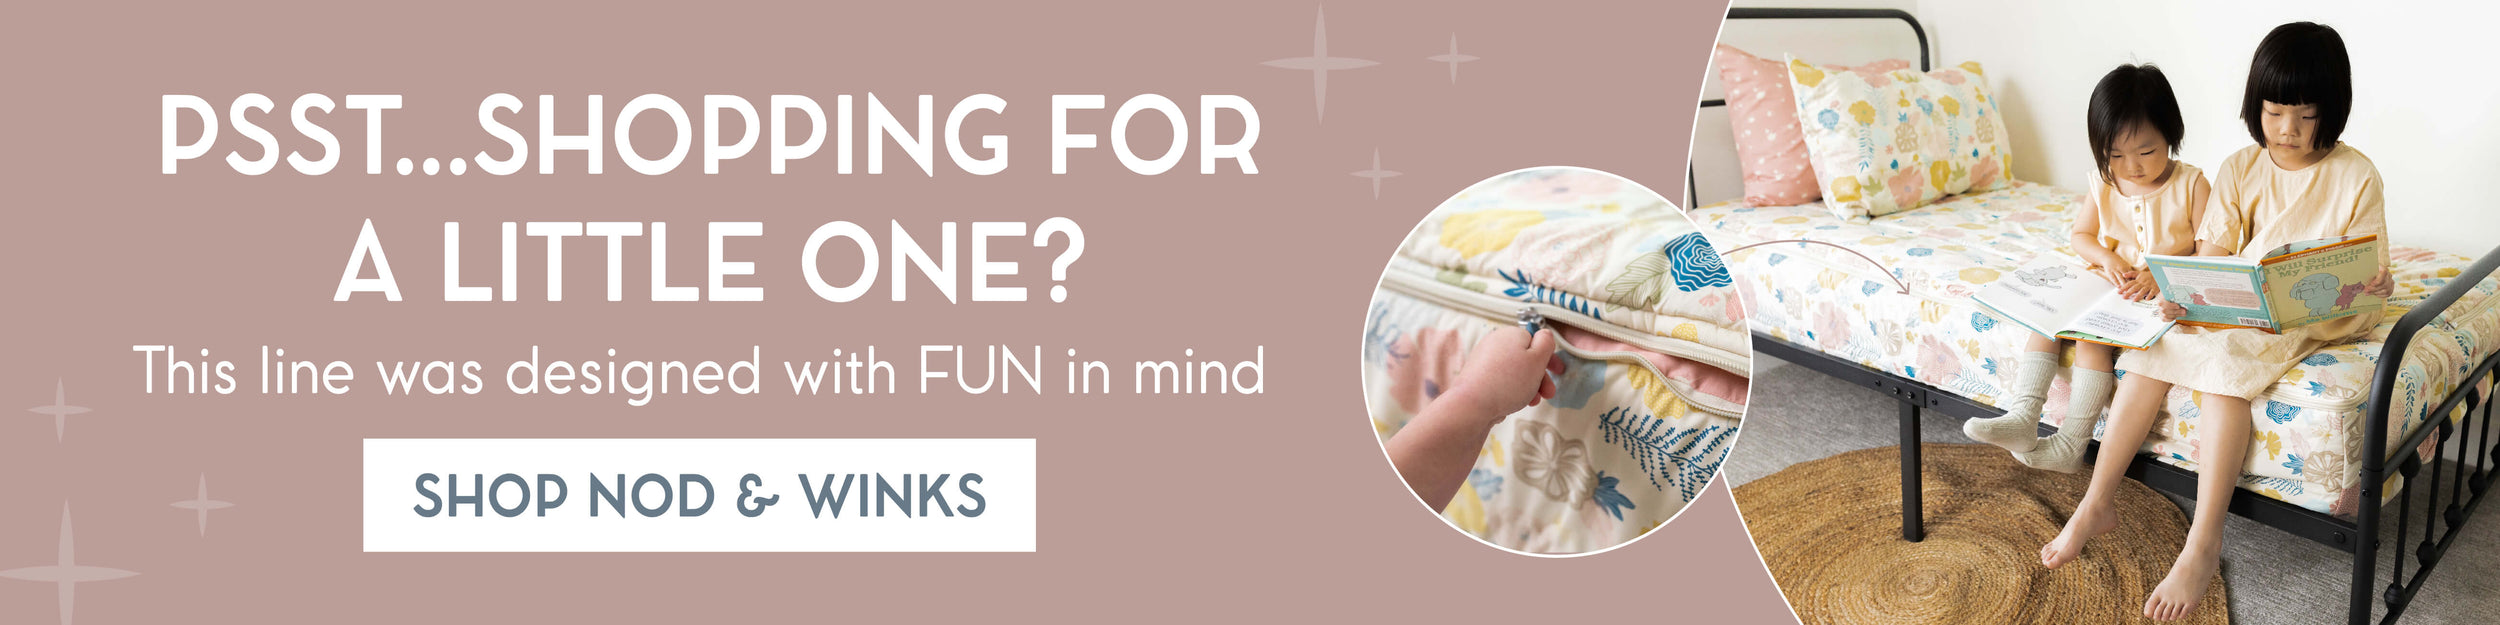 Nod and Winks was designed for kids fun